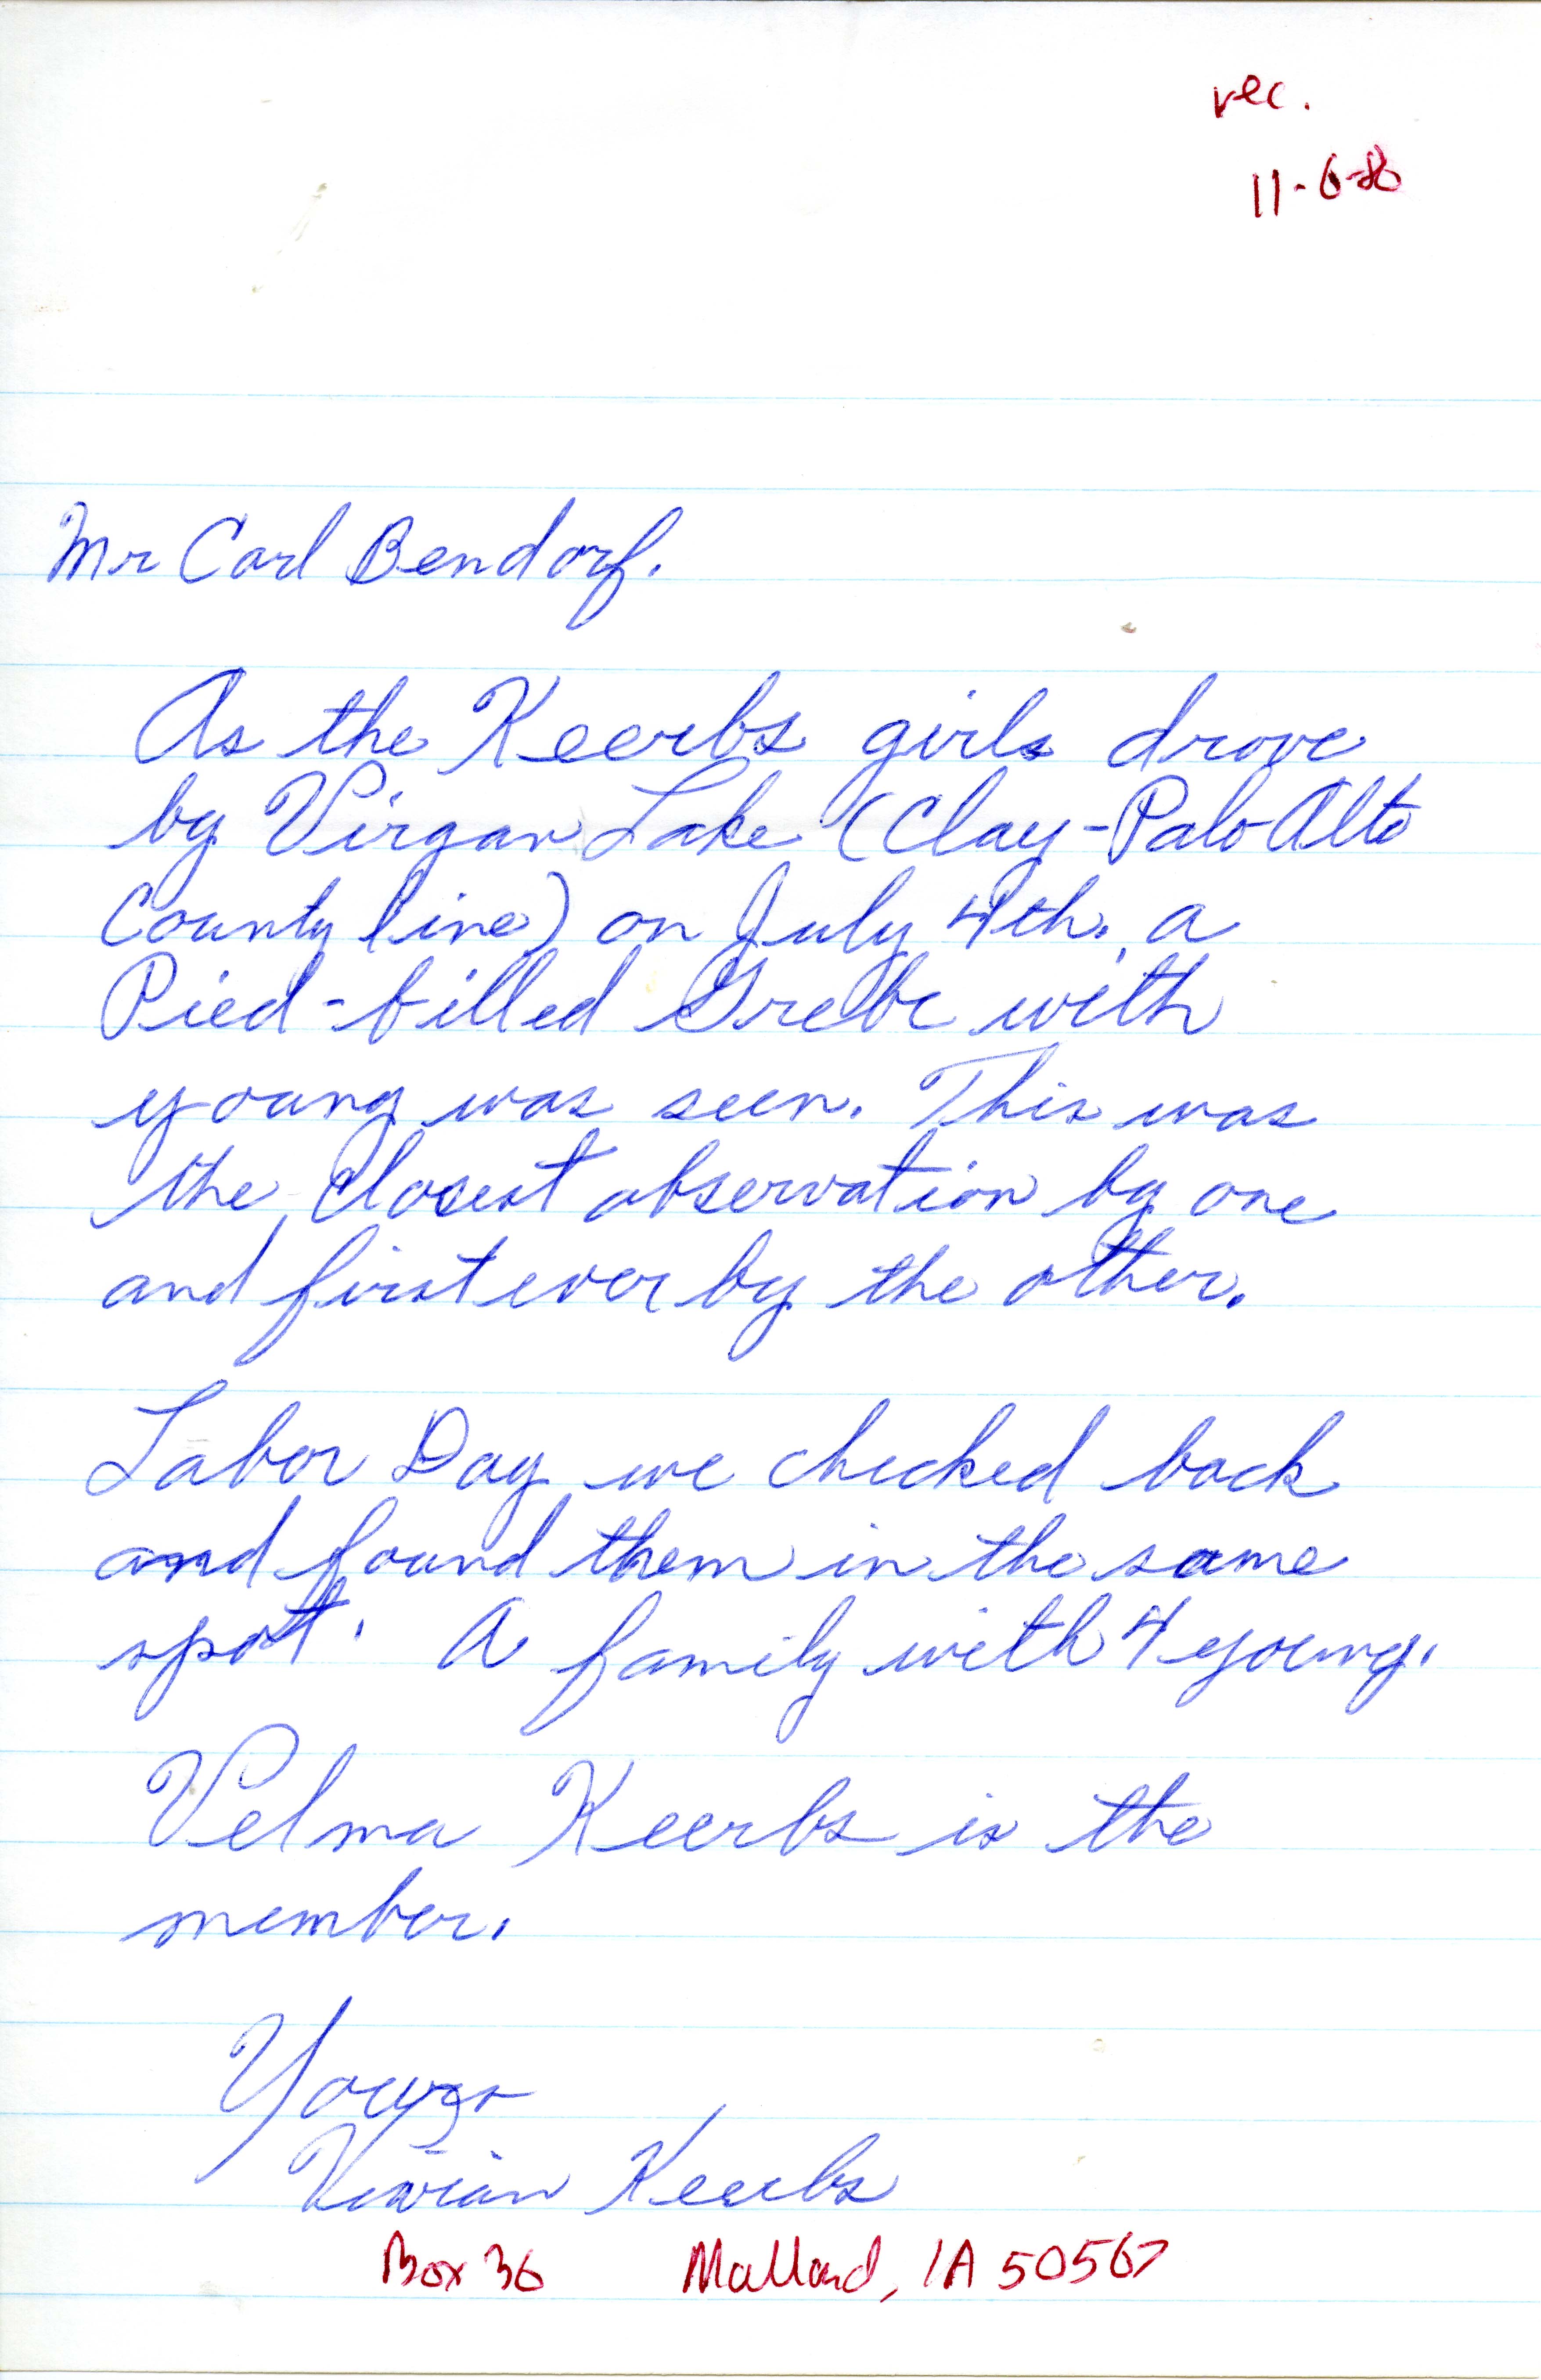 Vivian Keerbs letter to Carl J. Bendorf regarding the sighting of a Pied-billed Grebe, fall 1986